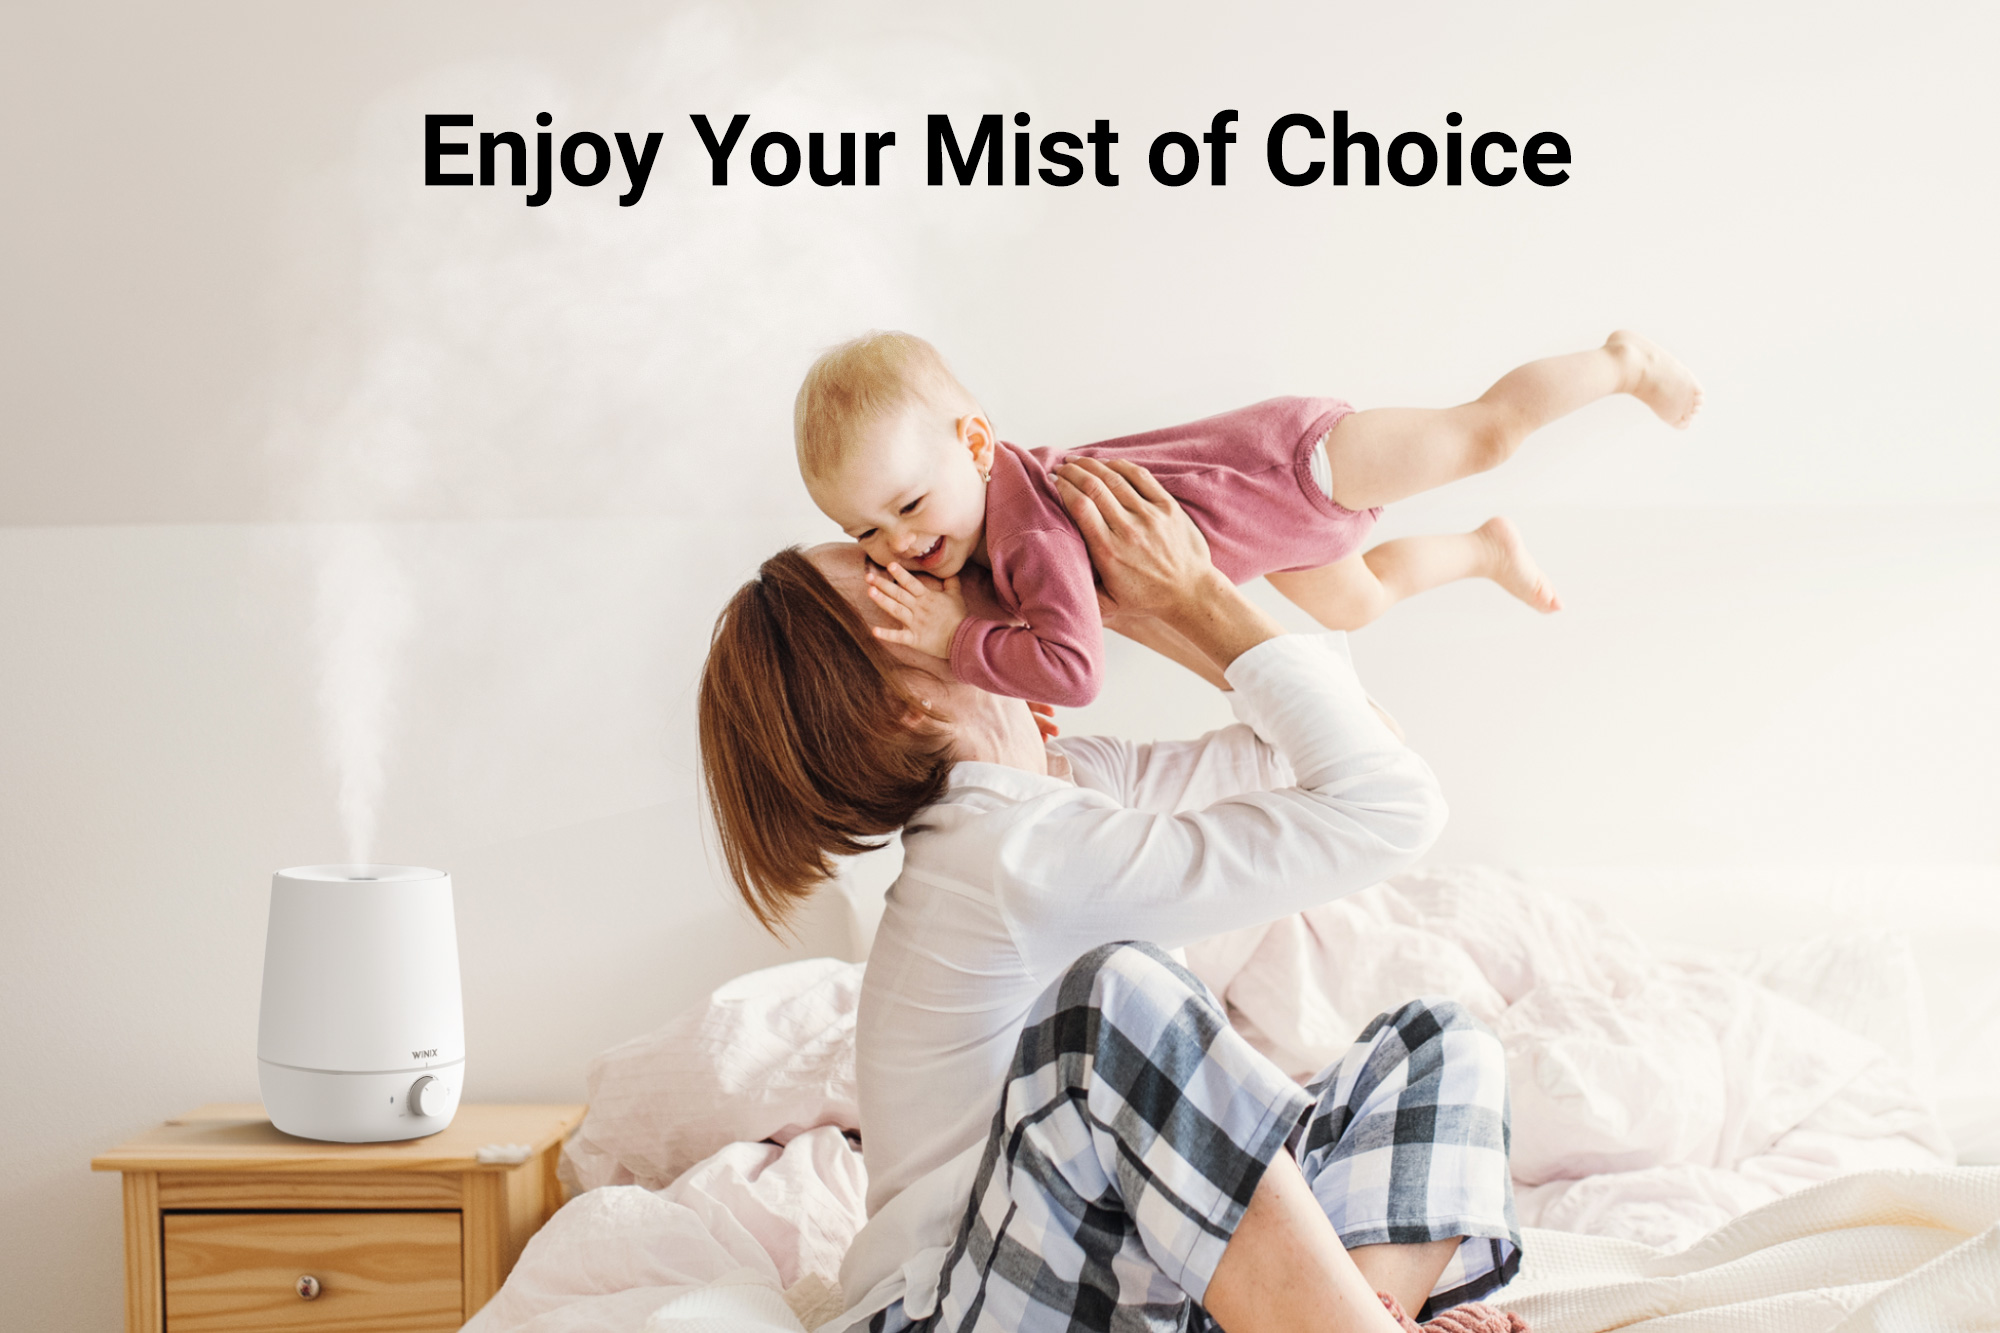 L60 Humidifier on nightstand next to woman and smiling baby and text saying Enjoy your Mist of Choice